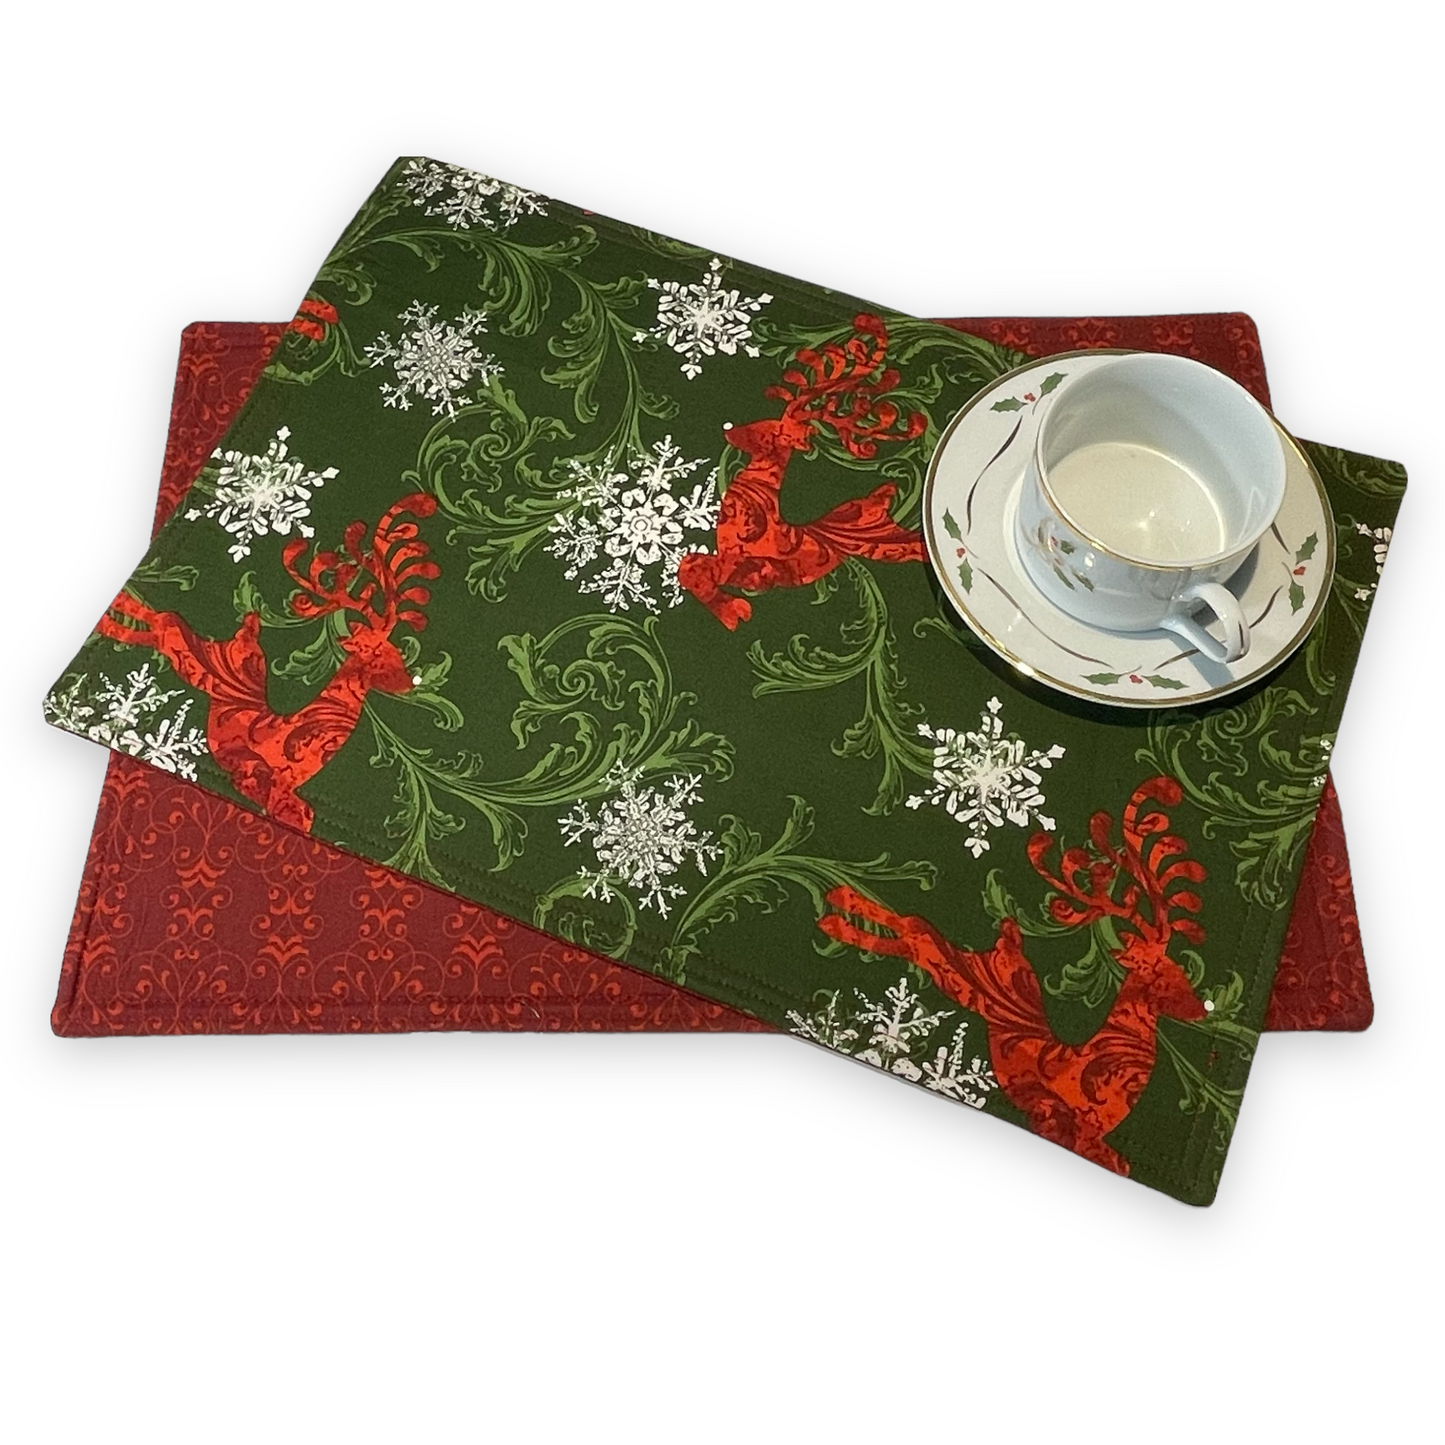 Two Christmas Reindeer Placemats, Christmas Kitchen Table Placemats, Christmas Dinner Table Decor - Home Stitchery Decor